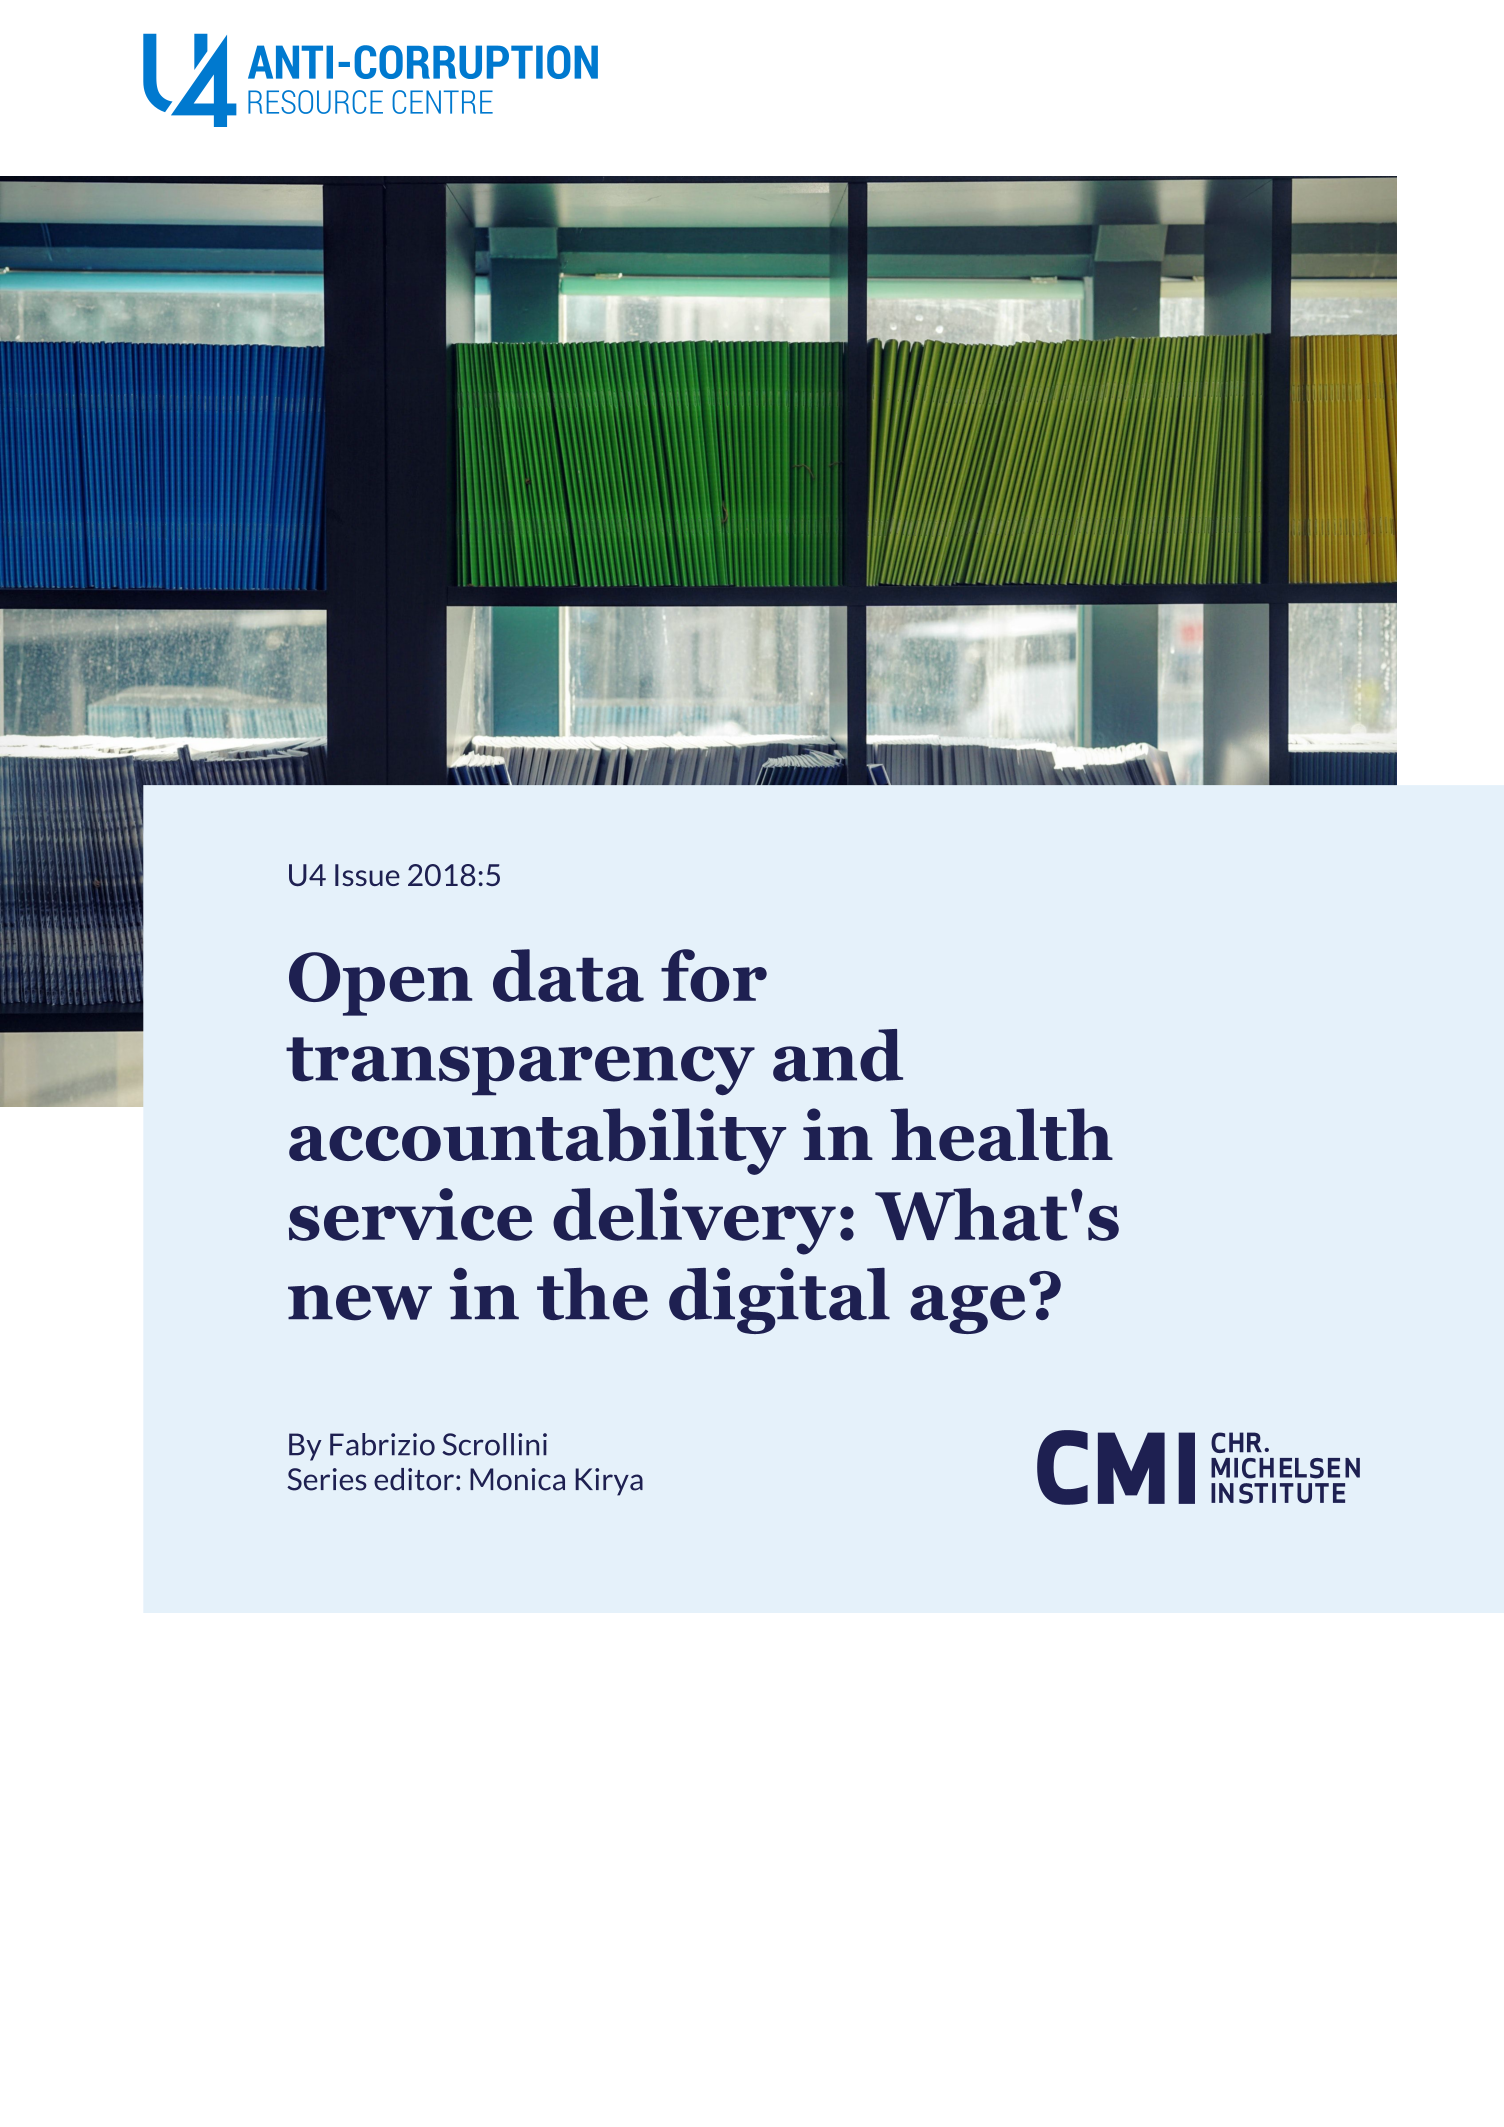 Open data for transparency and accountability in health service delivery: What's new in the digital age?